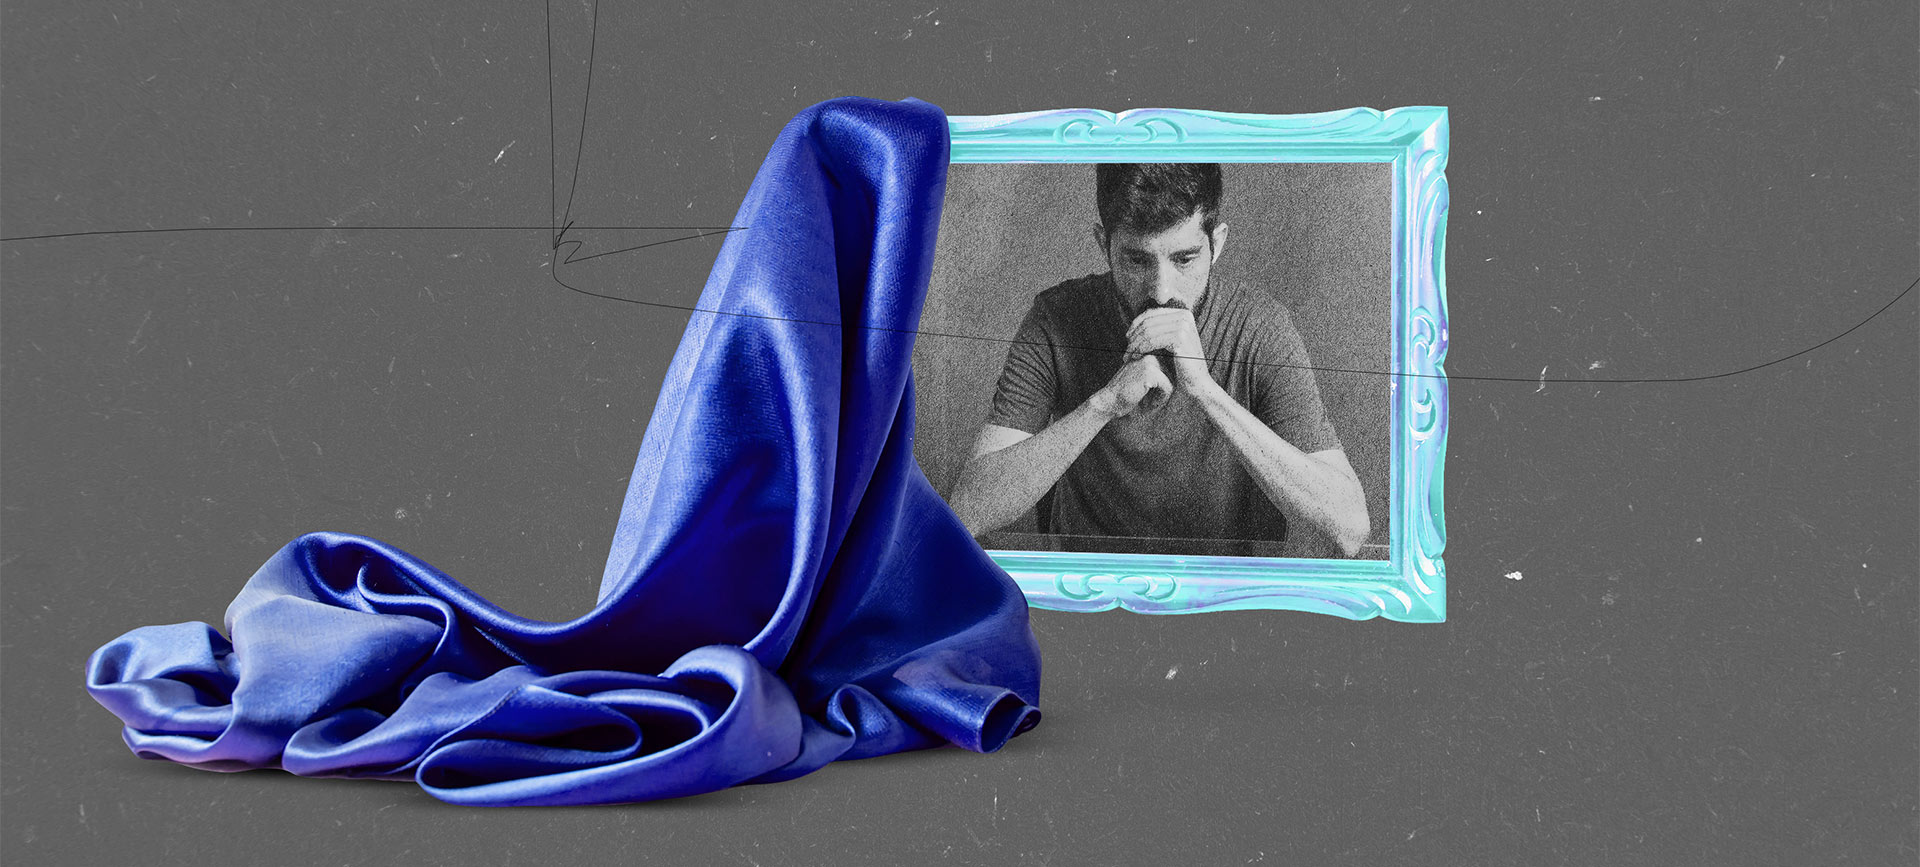 A blue curtain drapes over the side of a picture frame holding an image of a concerned man.